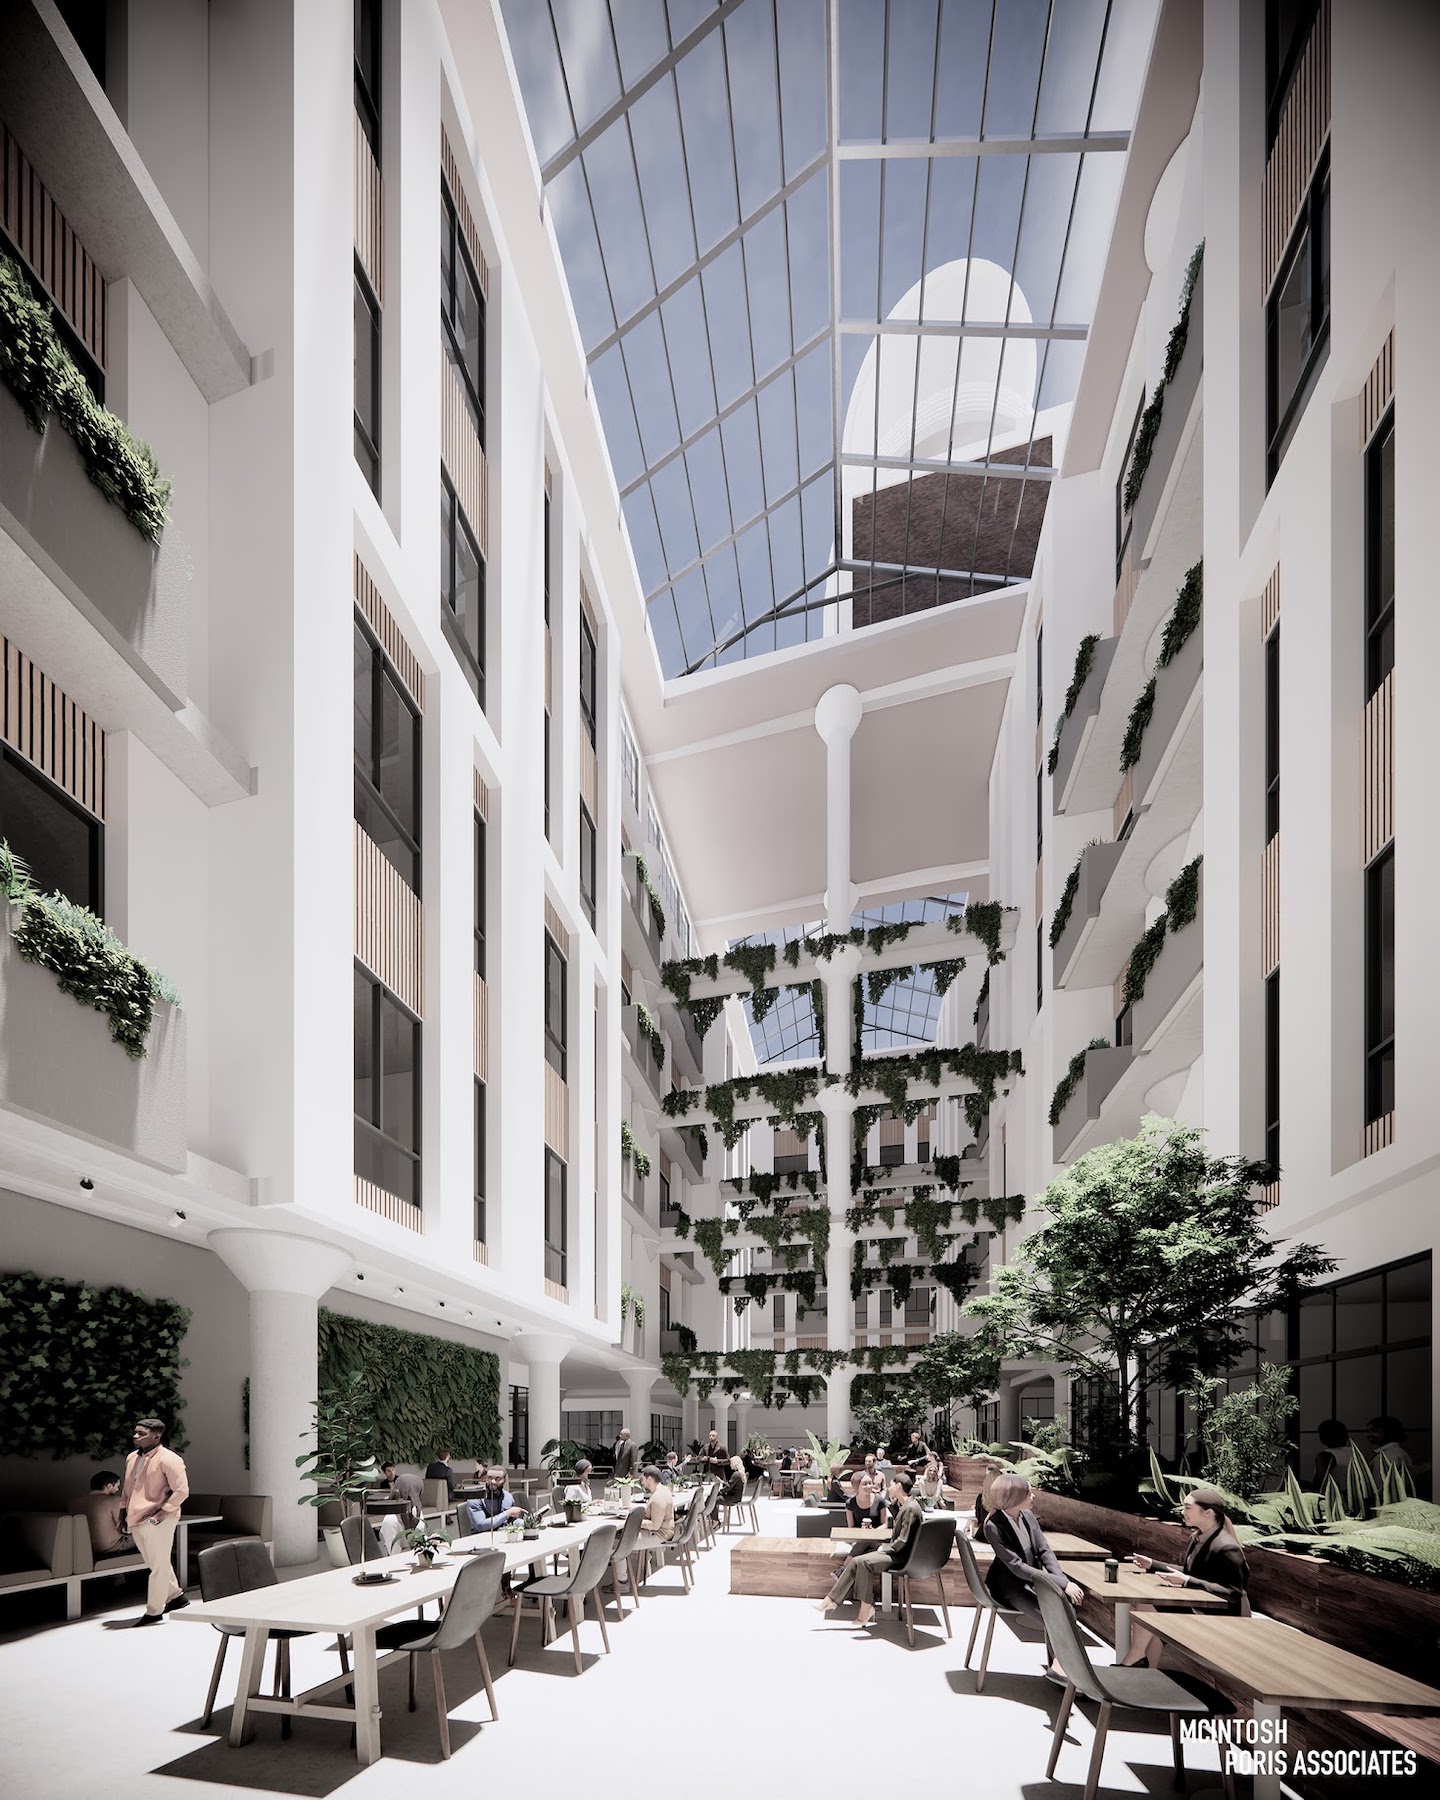 The redevelopment will include three atria with skylighting.